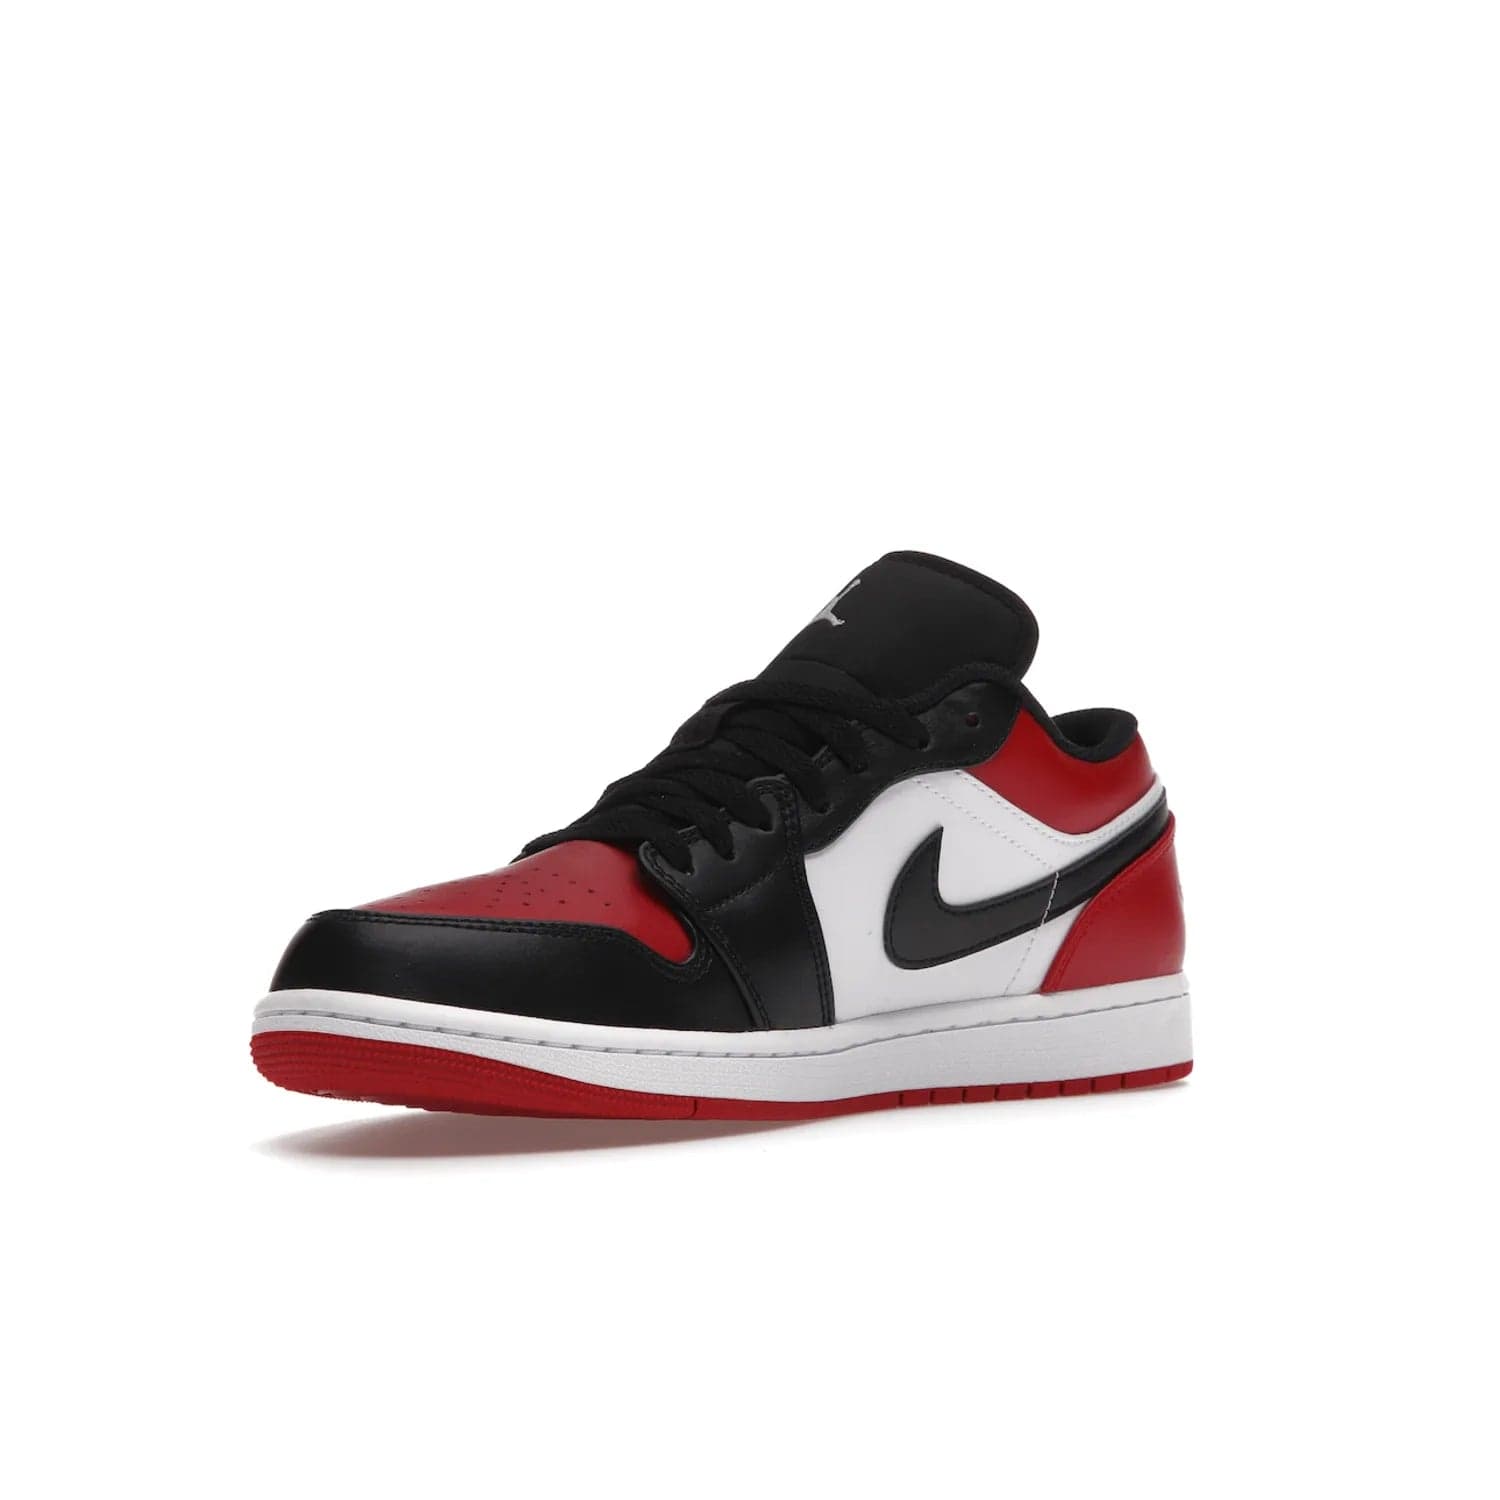 Jordan 1 Low Bred Toe - Image 15 - Only at www.BallersClubKickz.com - Step into the iconic Jordan 1 Retro. Mixing and matching of leather in red, black, and white makes for a unique colorway. Finished off with a Wing logo embroidery & Jumpman label. Comfortable and stylish at an affordable $100, the Jordan 1 Low Bred Toe is perfect for any true sneaker fan.